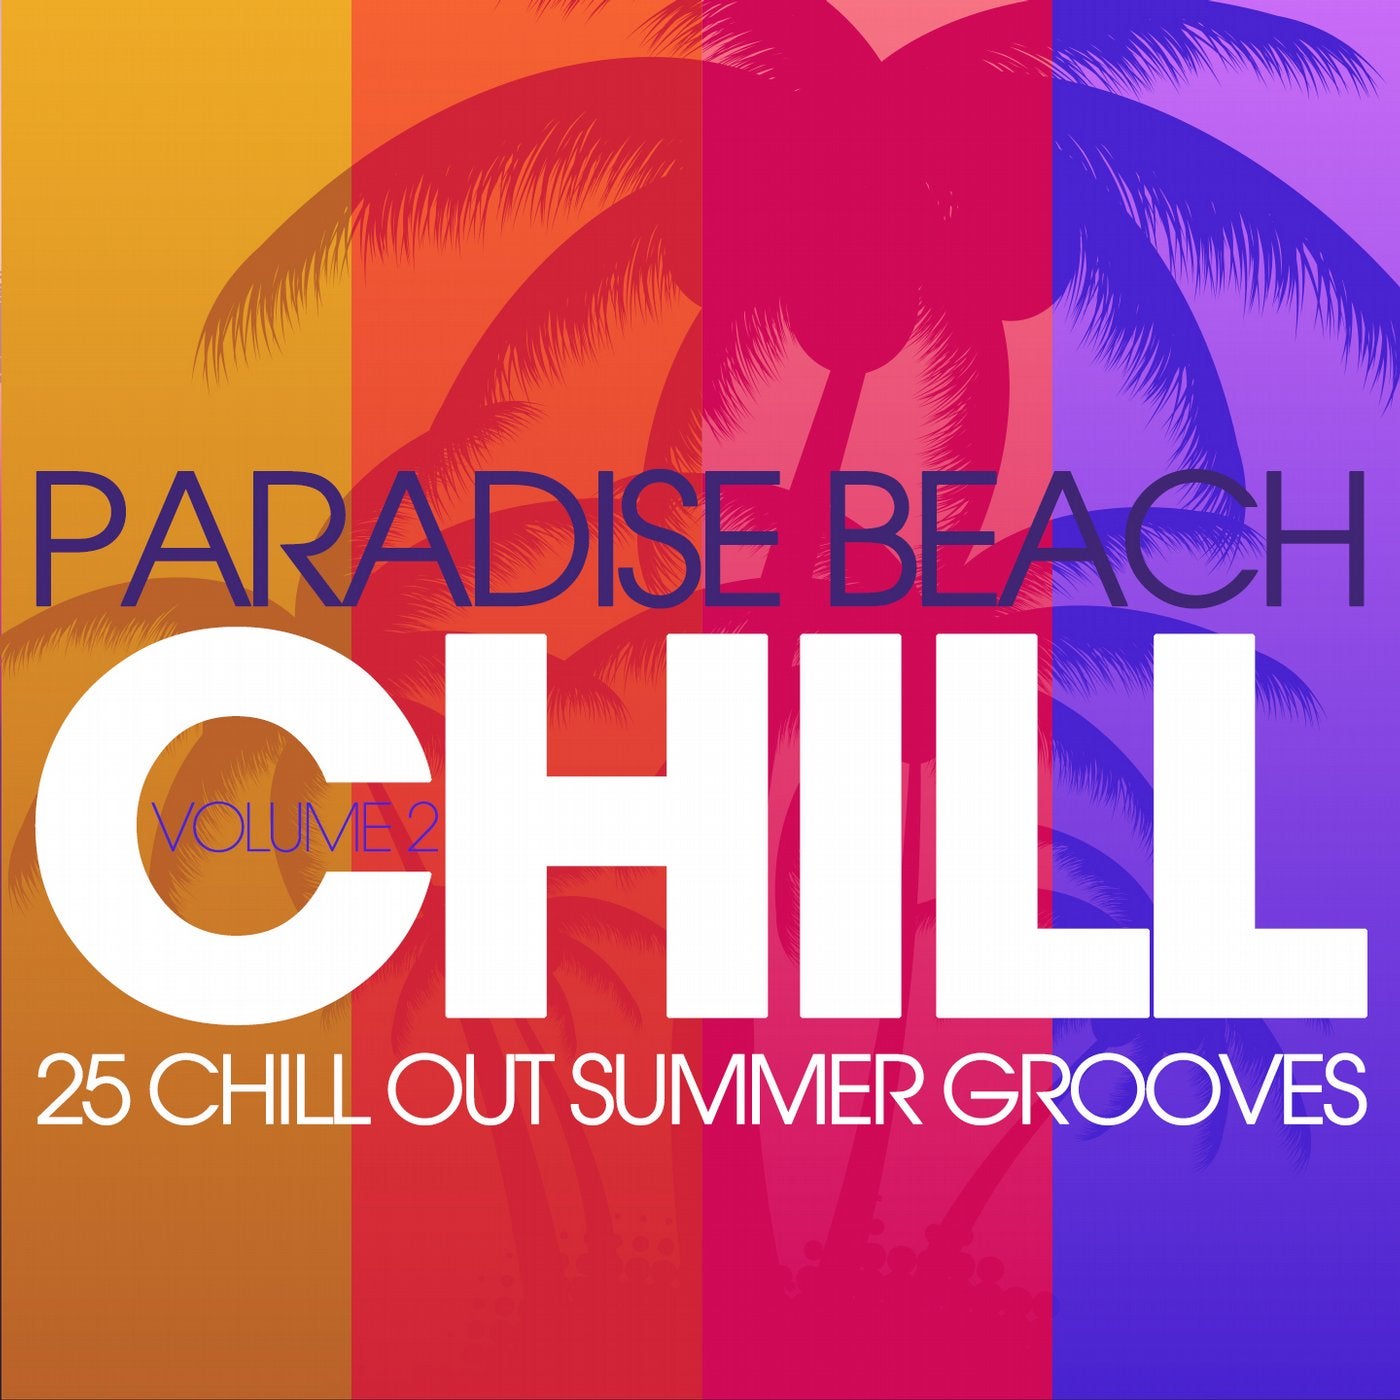 Paradise Beach Chill - 25 Chill Out Summer Grooves Vol. 2